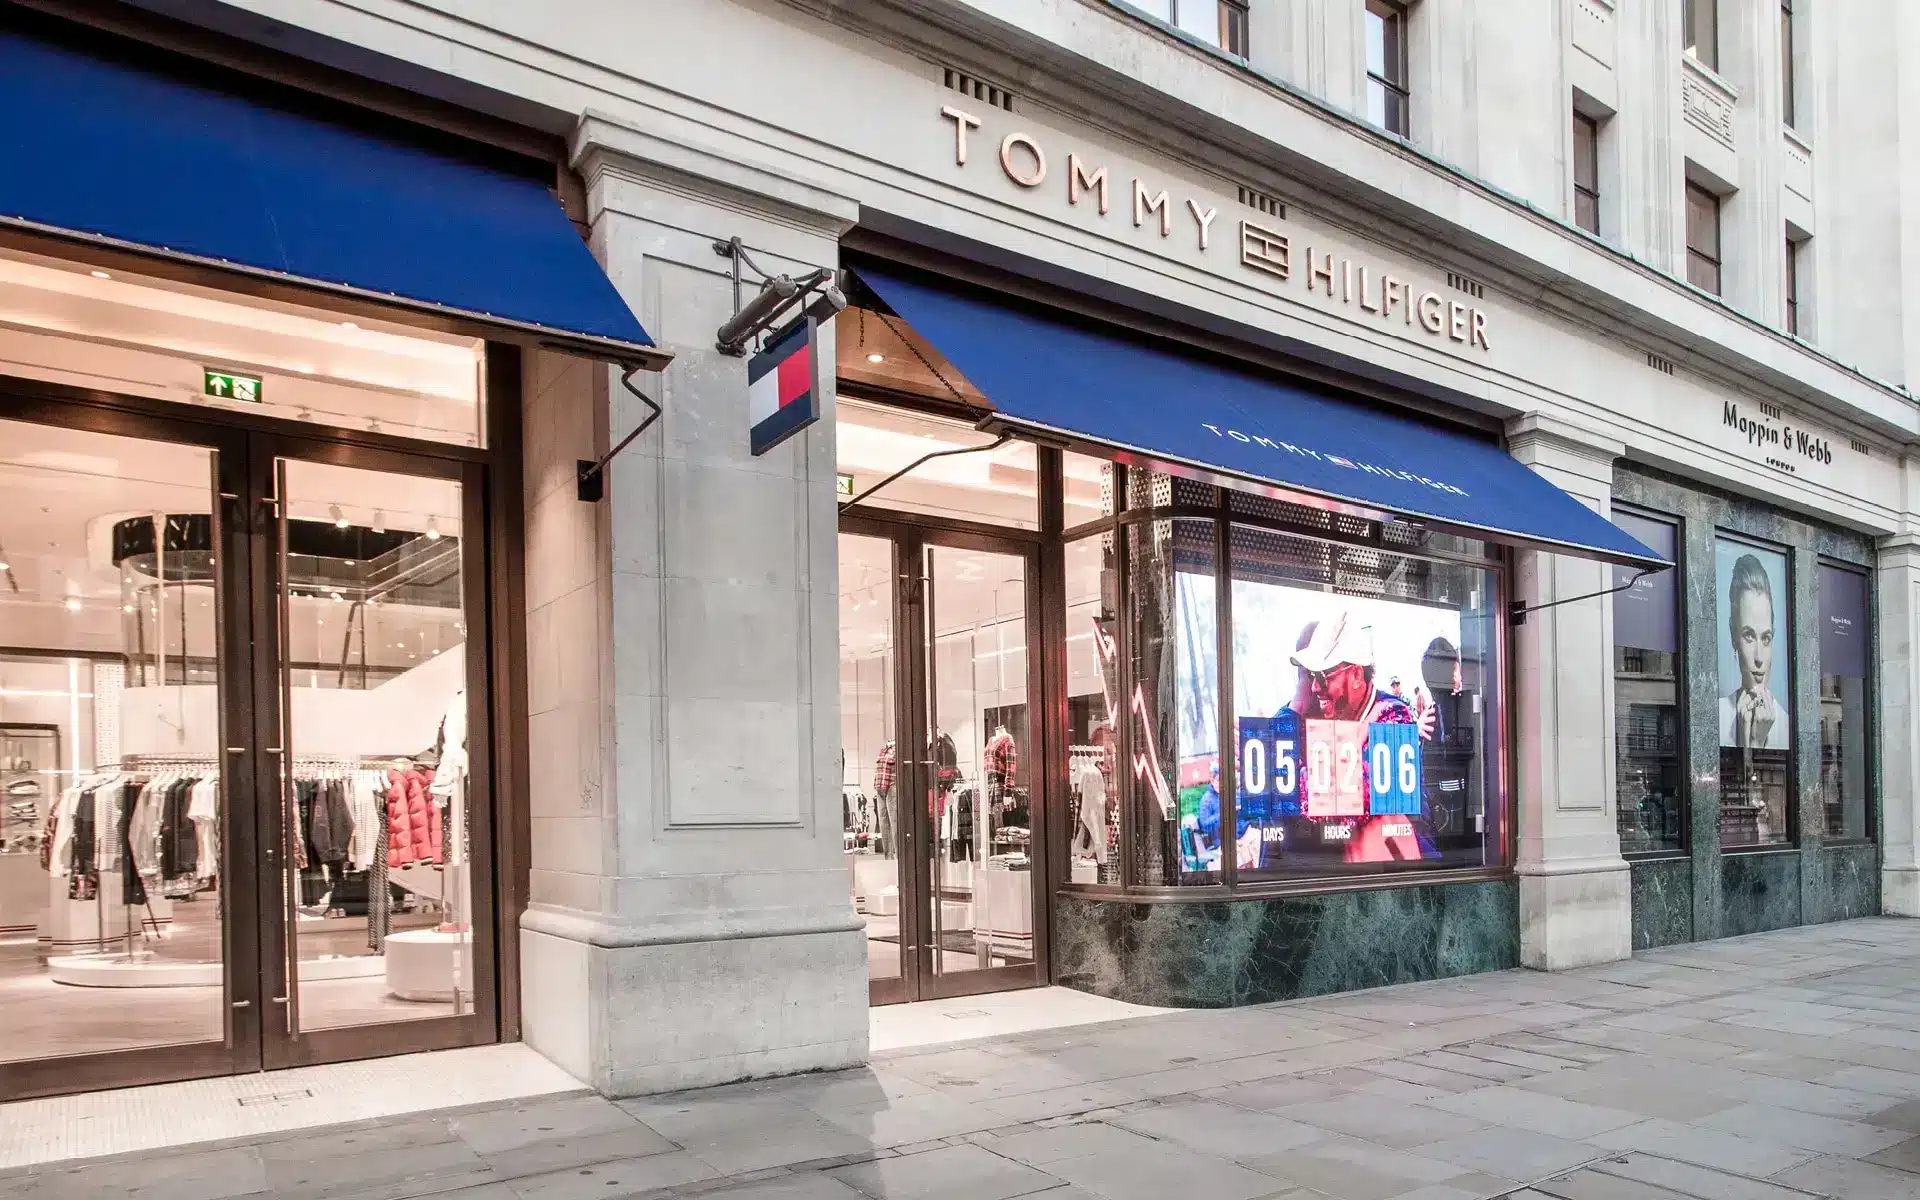 </p>
<p><strong>Tommy Hilfiger Flagship Store</strong><br />London</p>
<p>